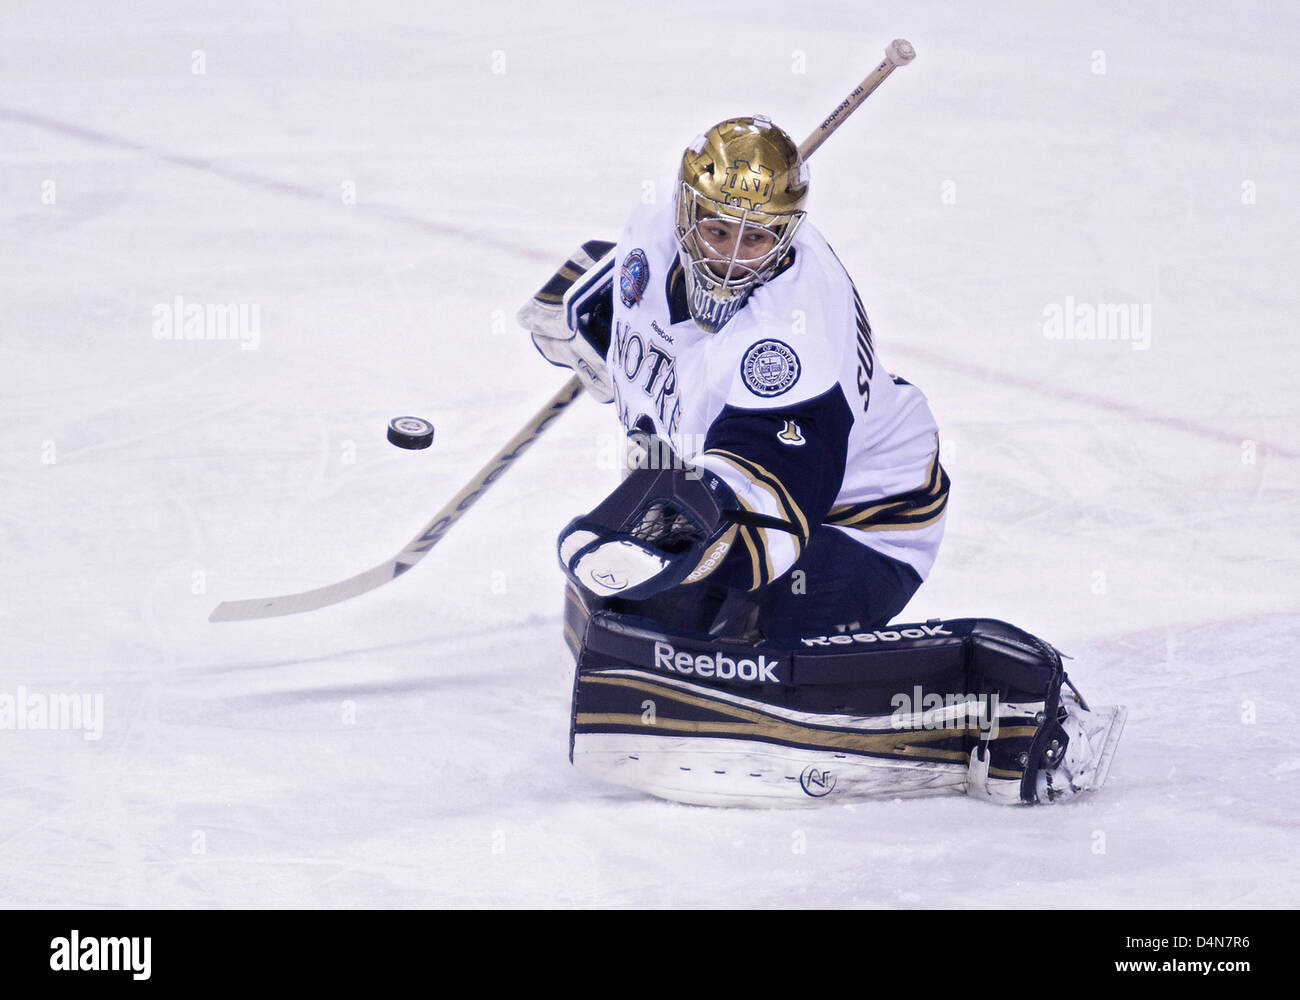 March 16, 2013 - South Bend, Indiana, United States of America - March 16, 2013: Notre Dame goaltender Steven Summerhays (1) makes the save during NCAA Hockey game action between the Notre Dame Fighting Irish and the Bowling Green Falcons at Compton Family Ice Arena in South Bend, Indiana. Notre Dame defeated Bowling Green 4-3. Stock Photo